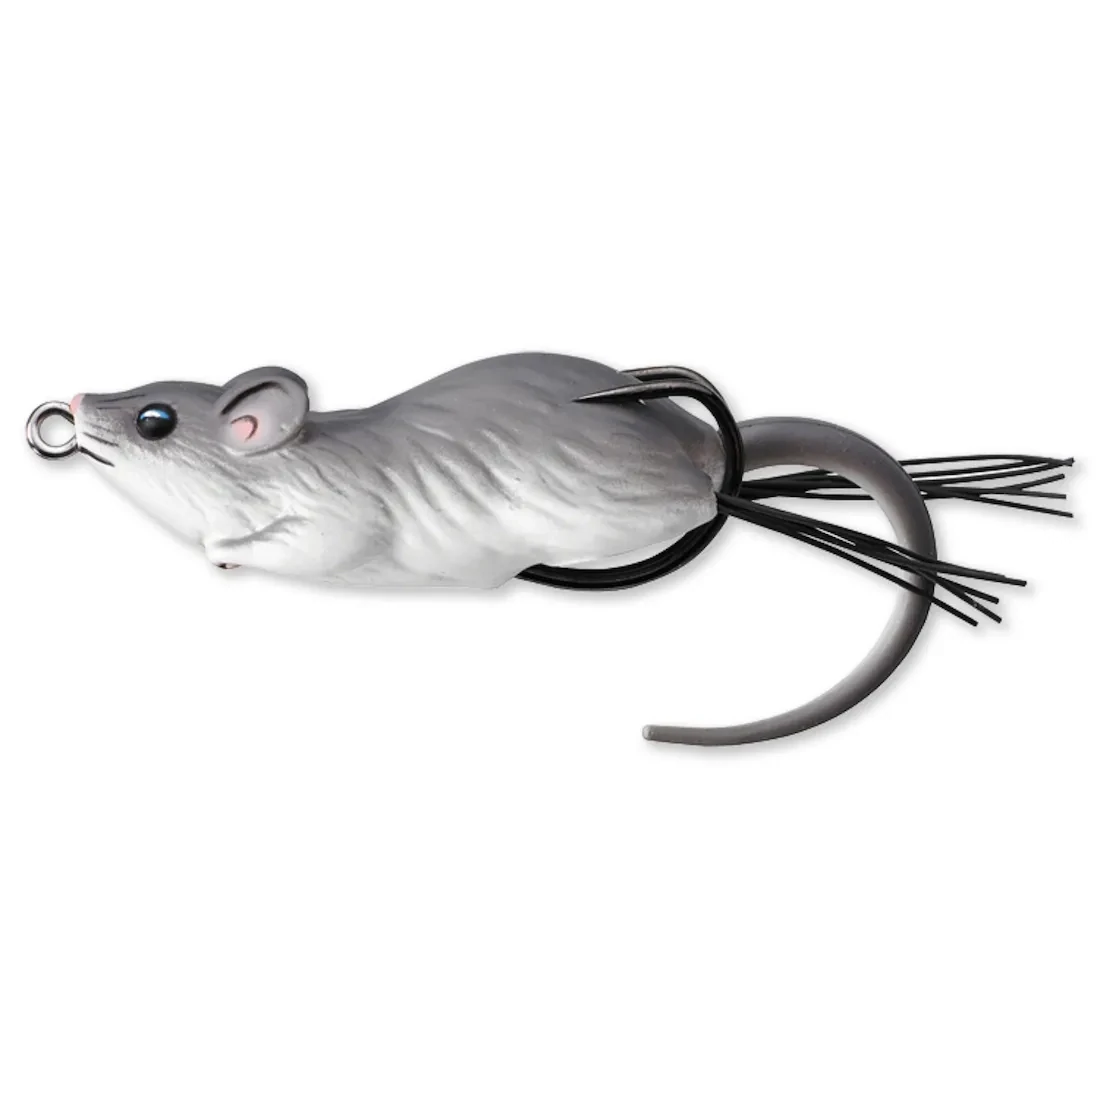 LT Hollow Body Mouse 2.25"